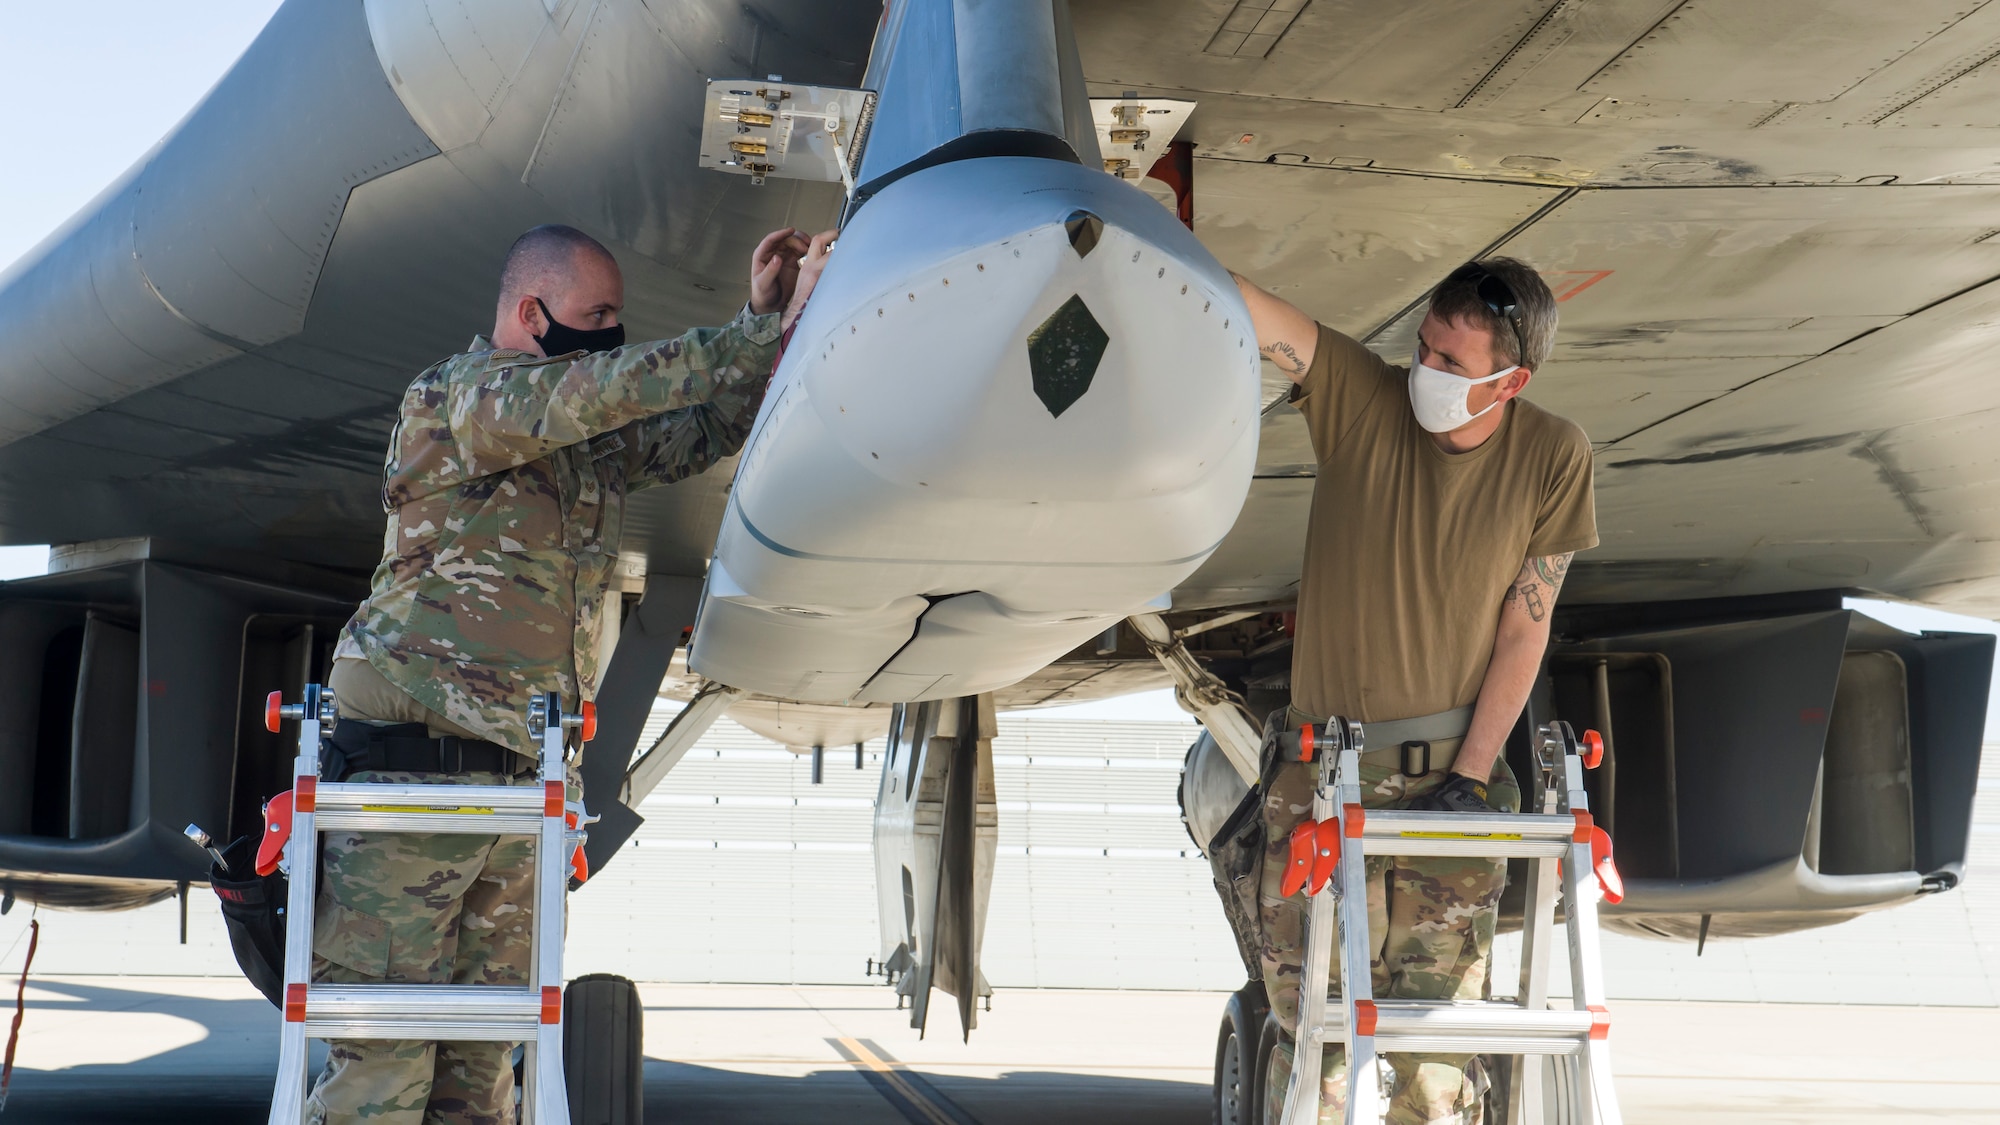 A weapon Loader crew uploads a Joint Air-to-Surface Standoff Missile to an external pylon on a B-1B Lancer at Edwards Air Force Base, California, Dec. 2. The Lancer successfully conducted an external release demonstration of the JASSM using the pylon in the skies over Holloman Air Force Base, New Mexico, Dec. 4. (Air Force photo by Joshua Miller)